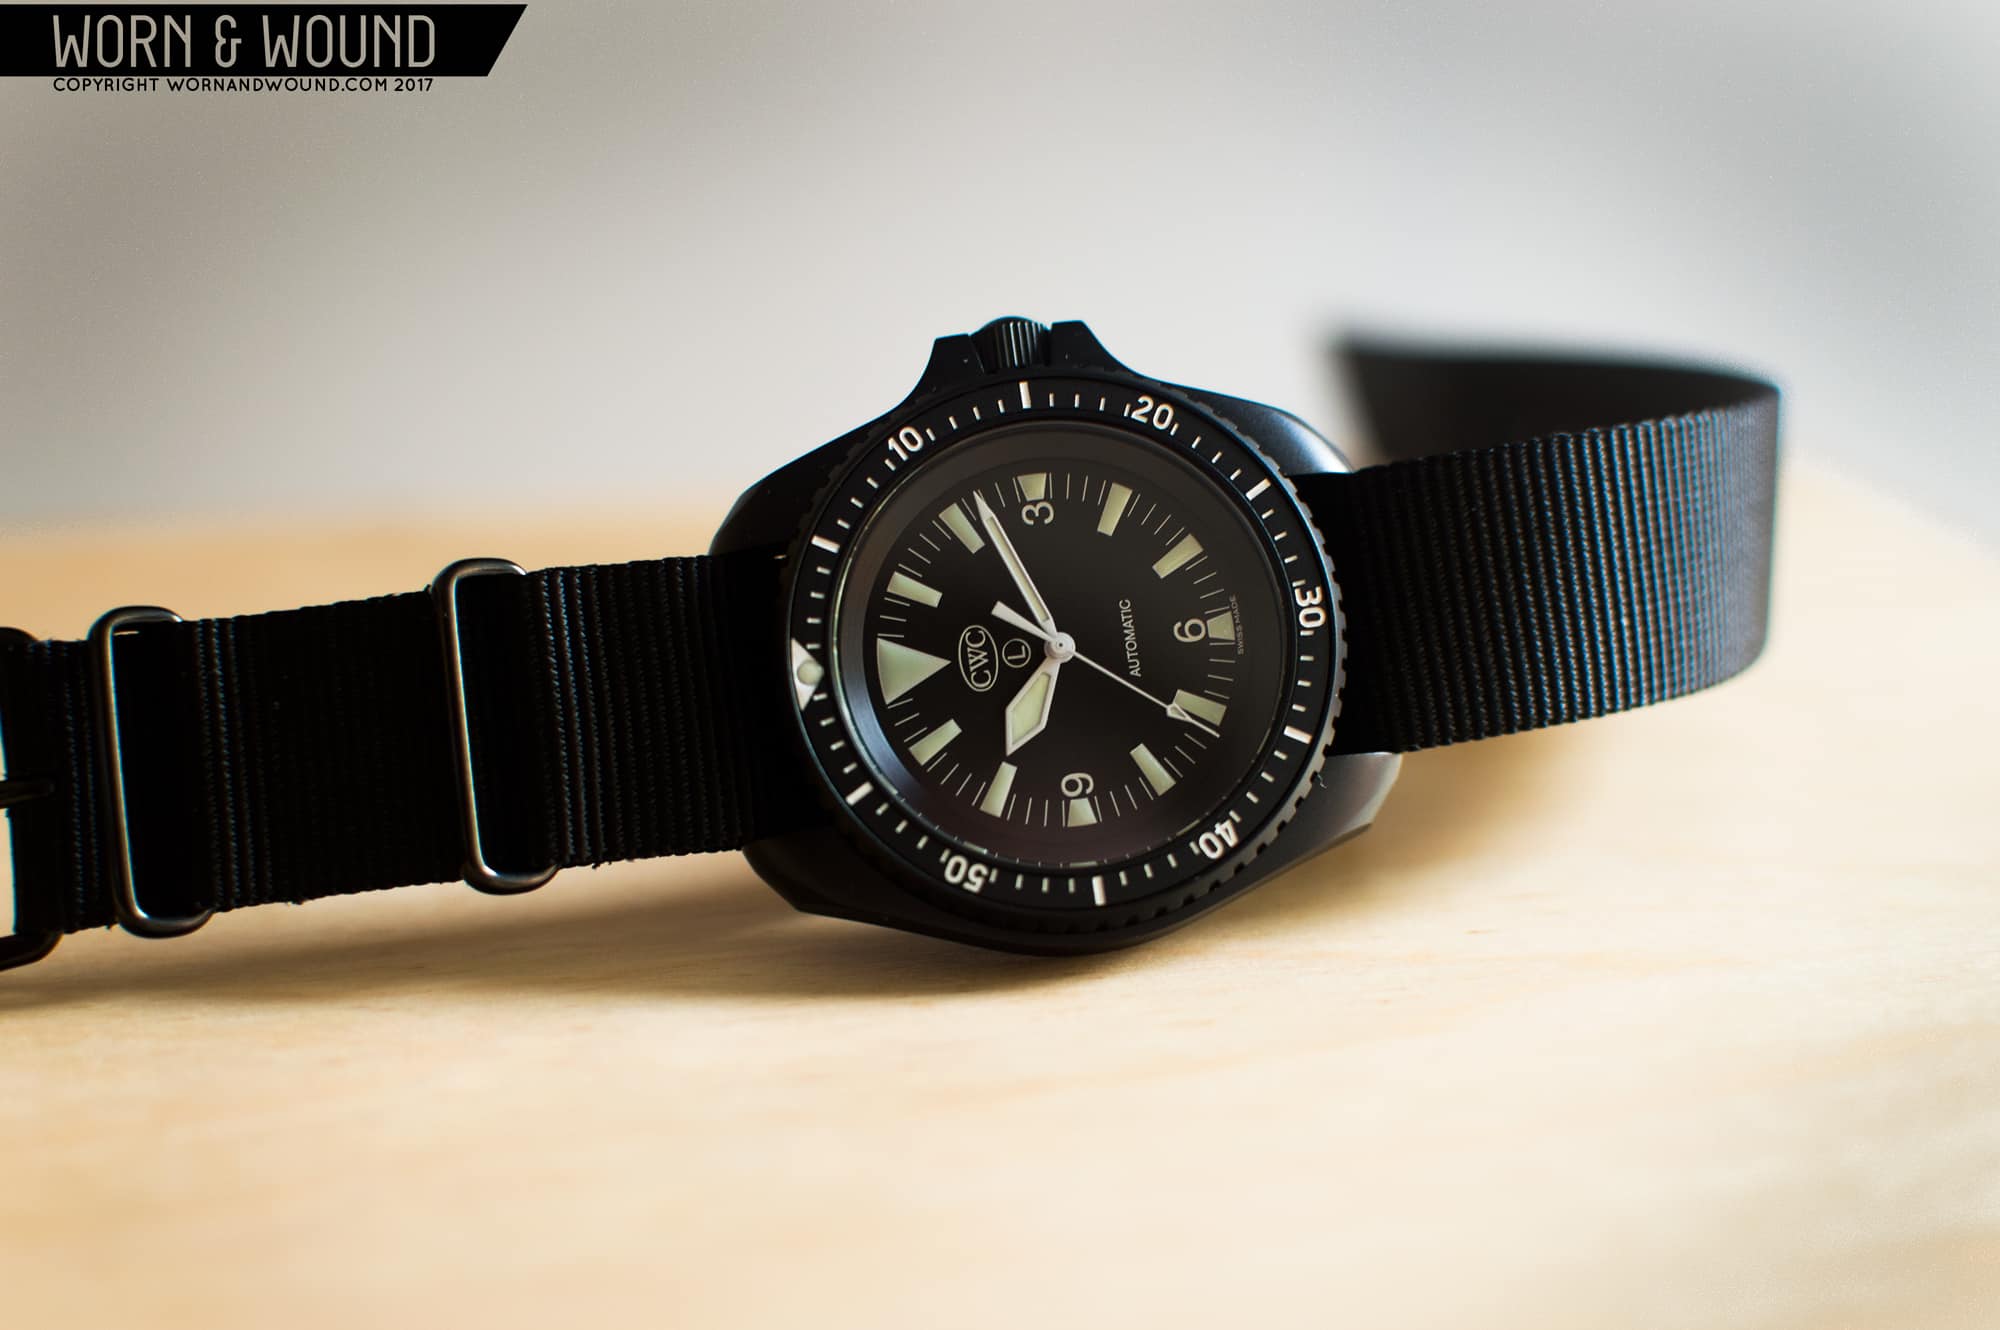 CWC Royal Navy Black Diver Automatic Mk. 2 Review